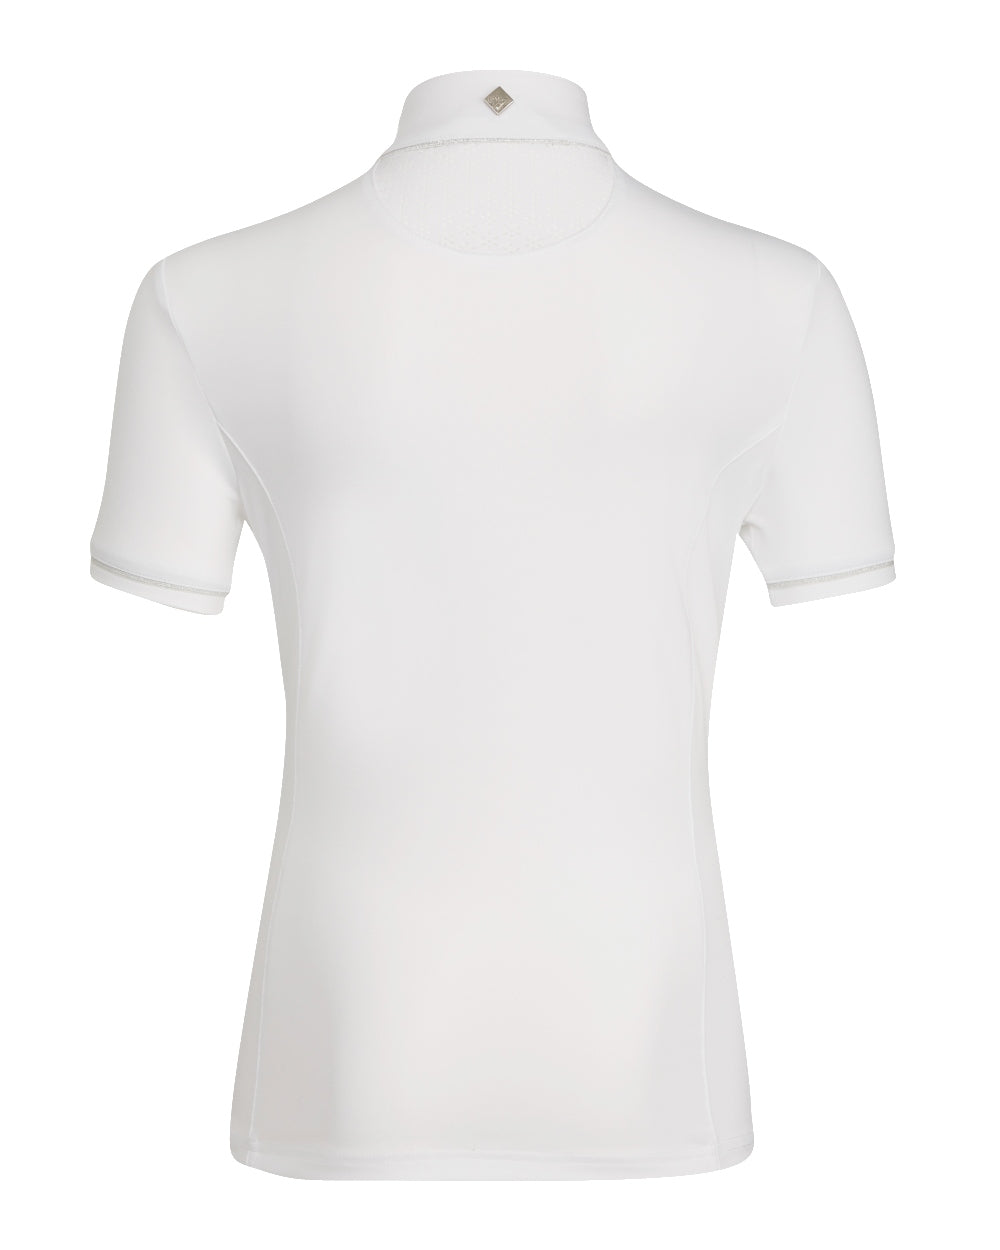 White coloured LeMieux Young Rider Belle Show Shirts on white background 